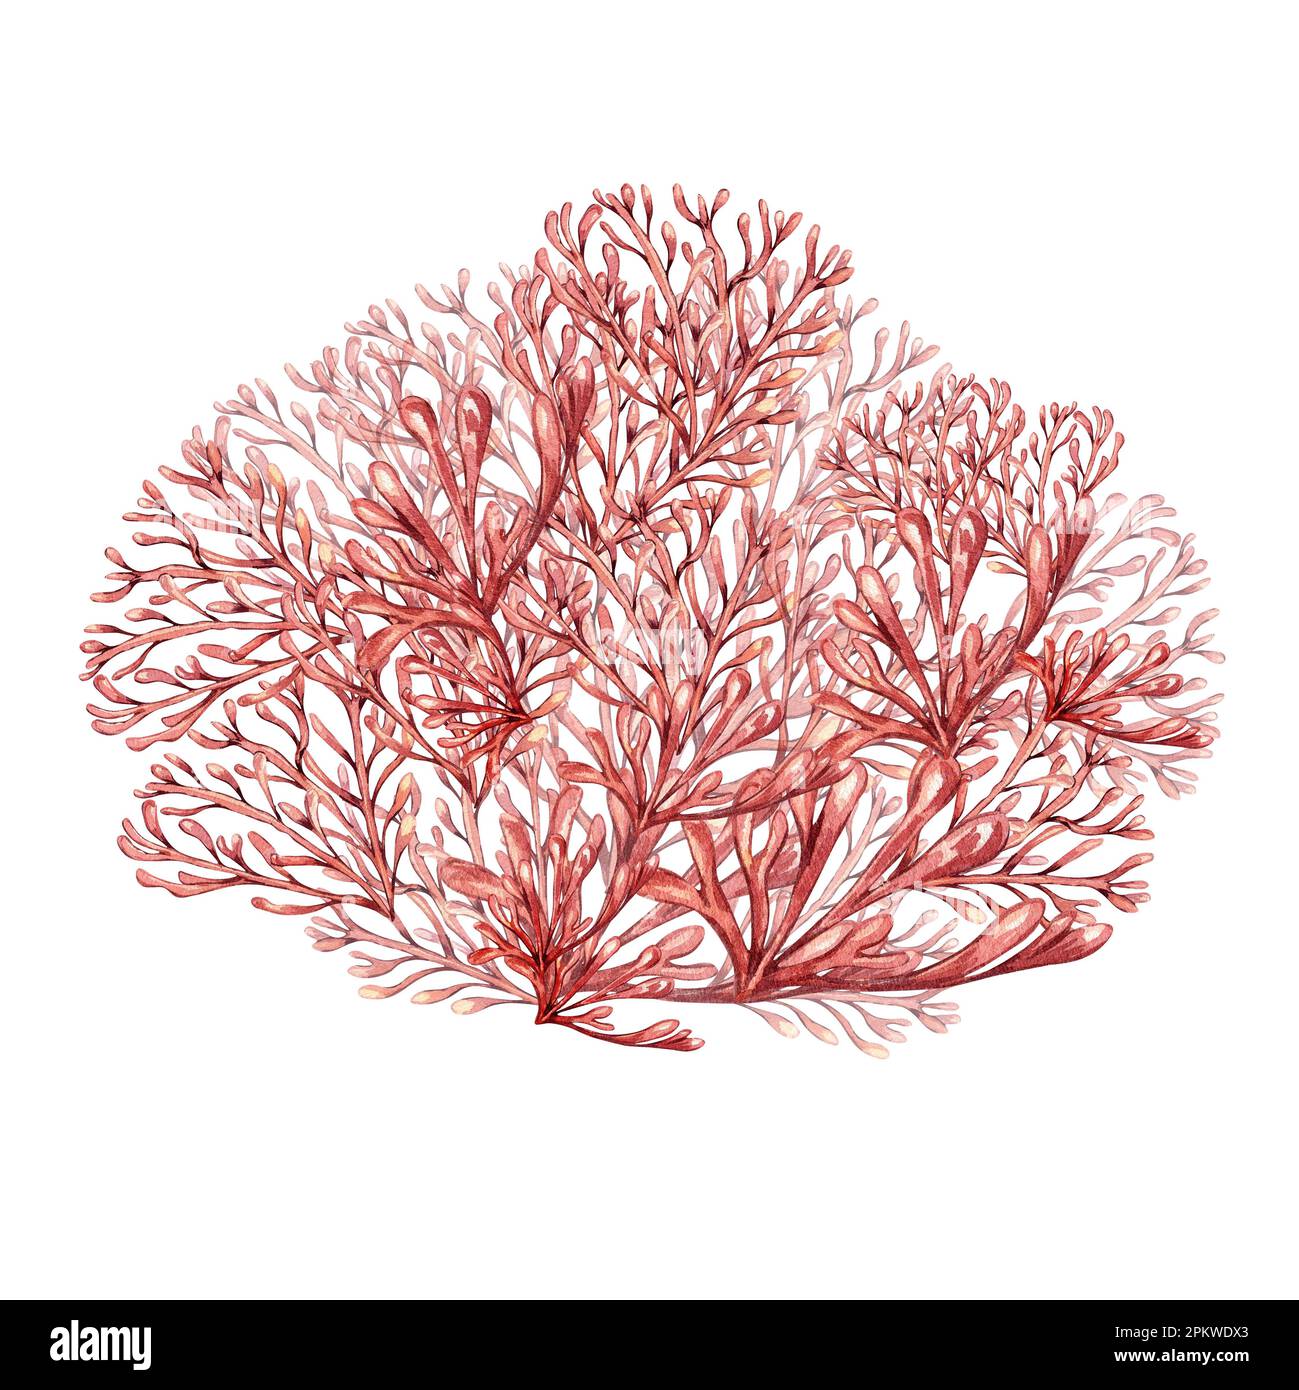 Sea plants, coral watercolor illustration isolated on white background. Pink agar agar seaweed, phyllophora hand drawn. Design element for package, la Stock Photo